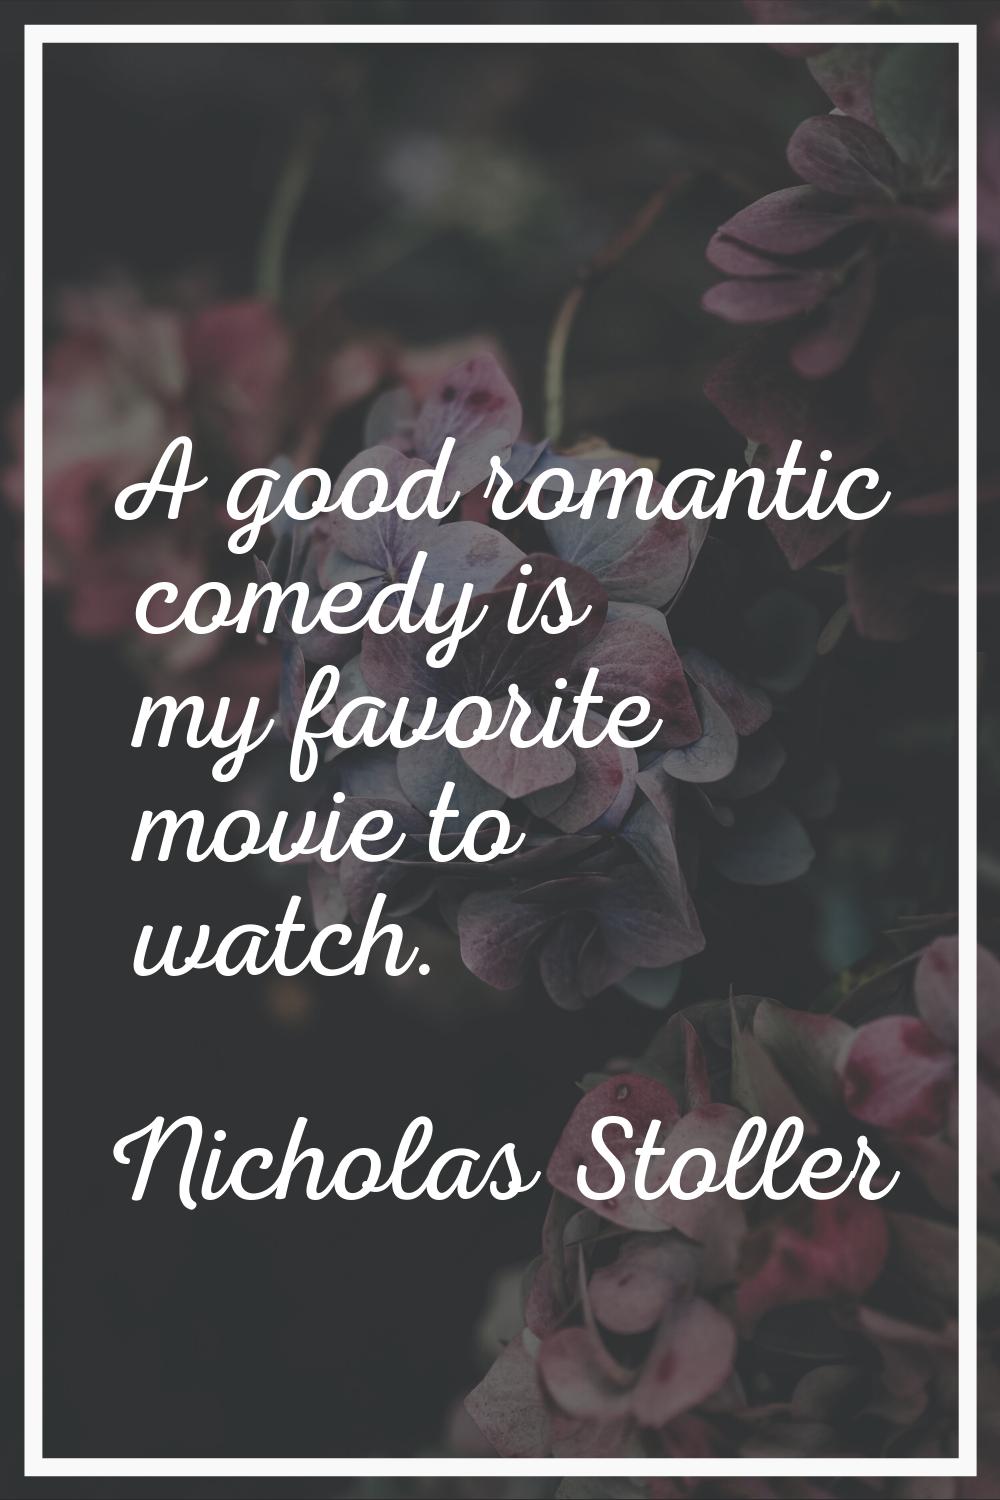 A good romantic comedy is my favorite movie to watch.